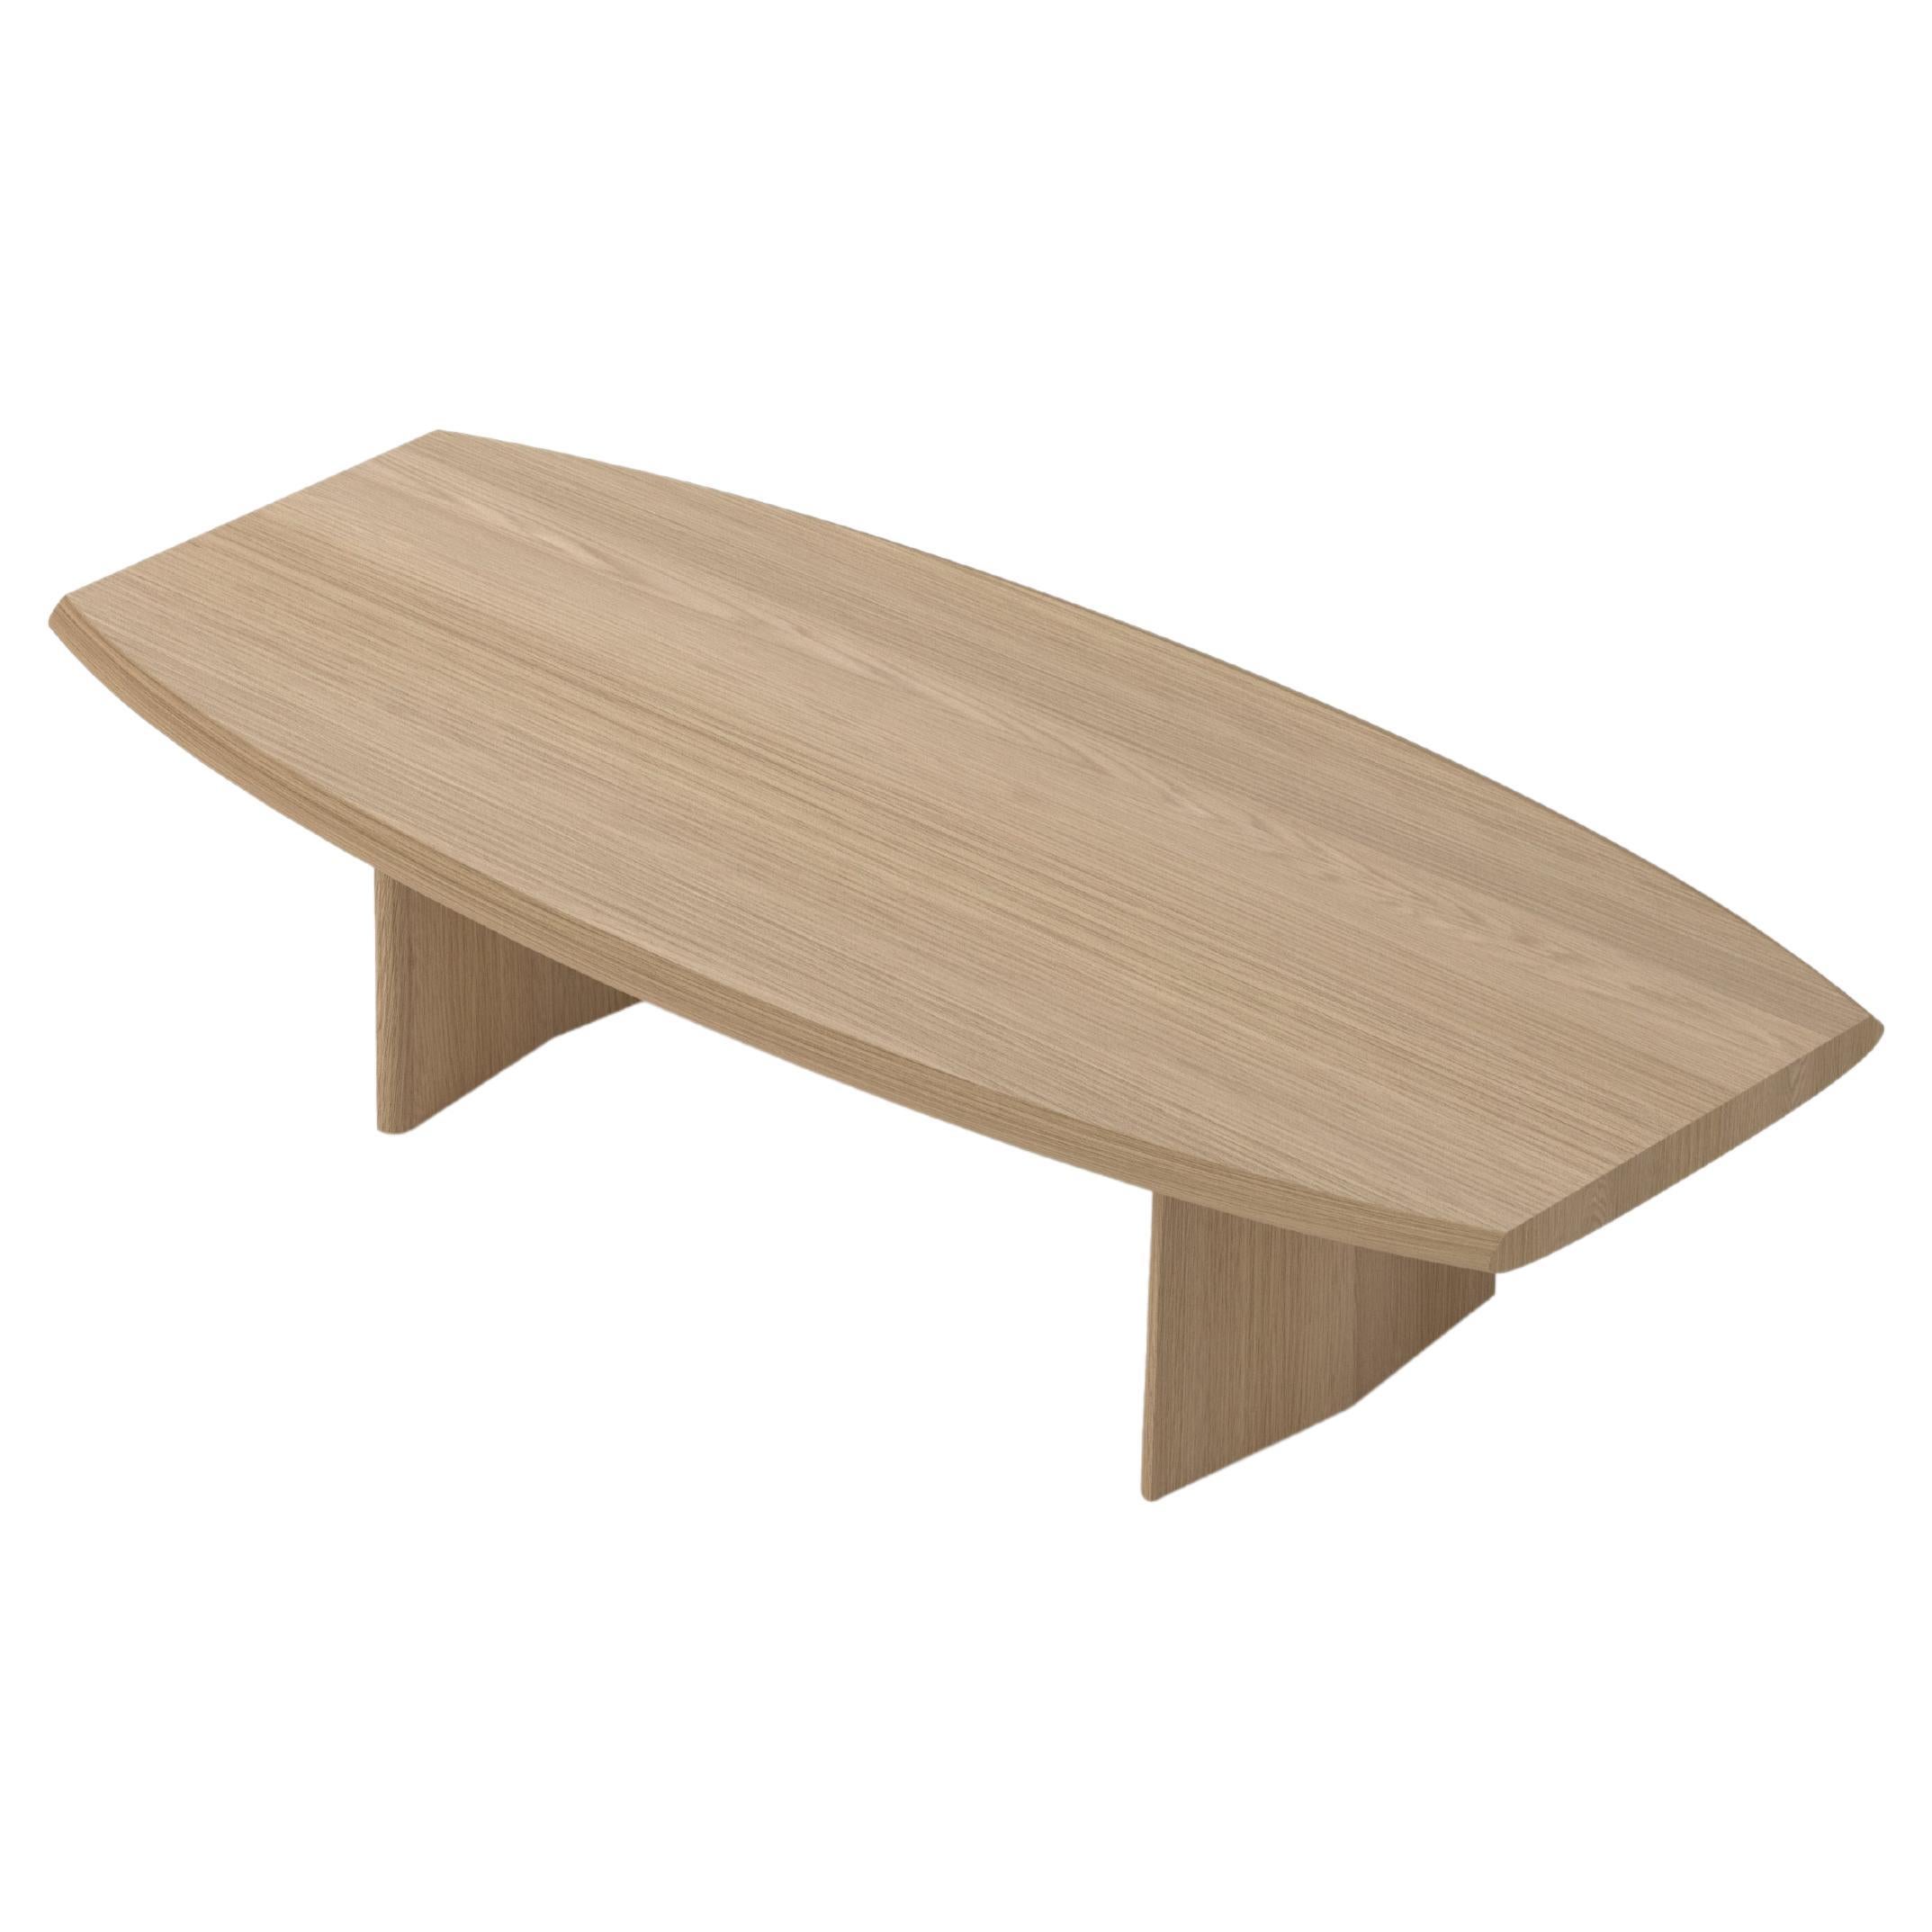 Peana Coffee Table, Bench in Natural Oak Solid Wood Finish by Joel Escalona